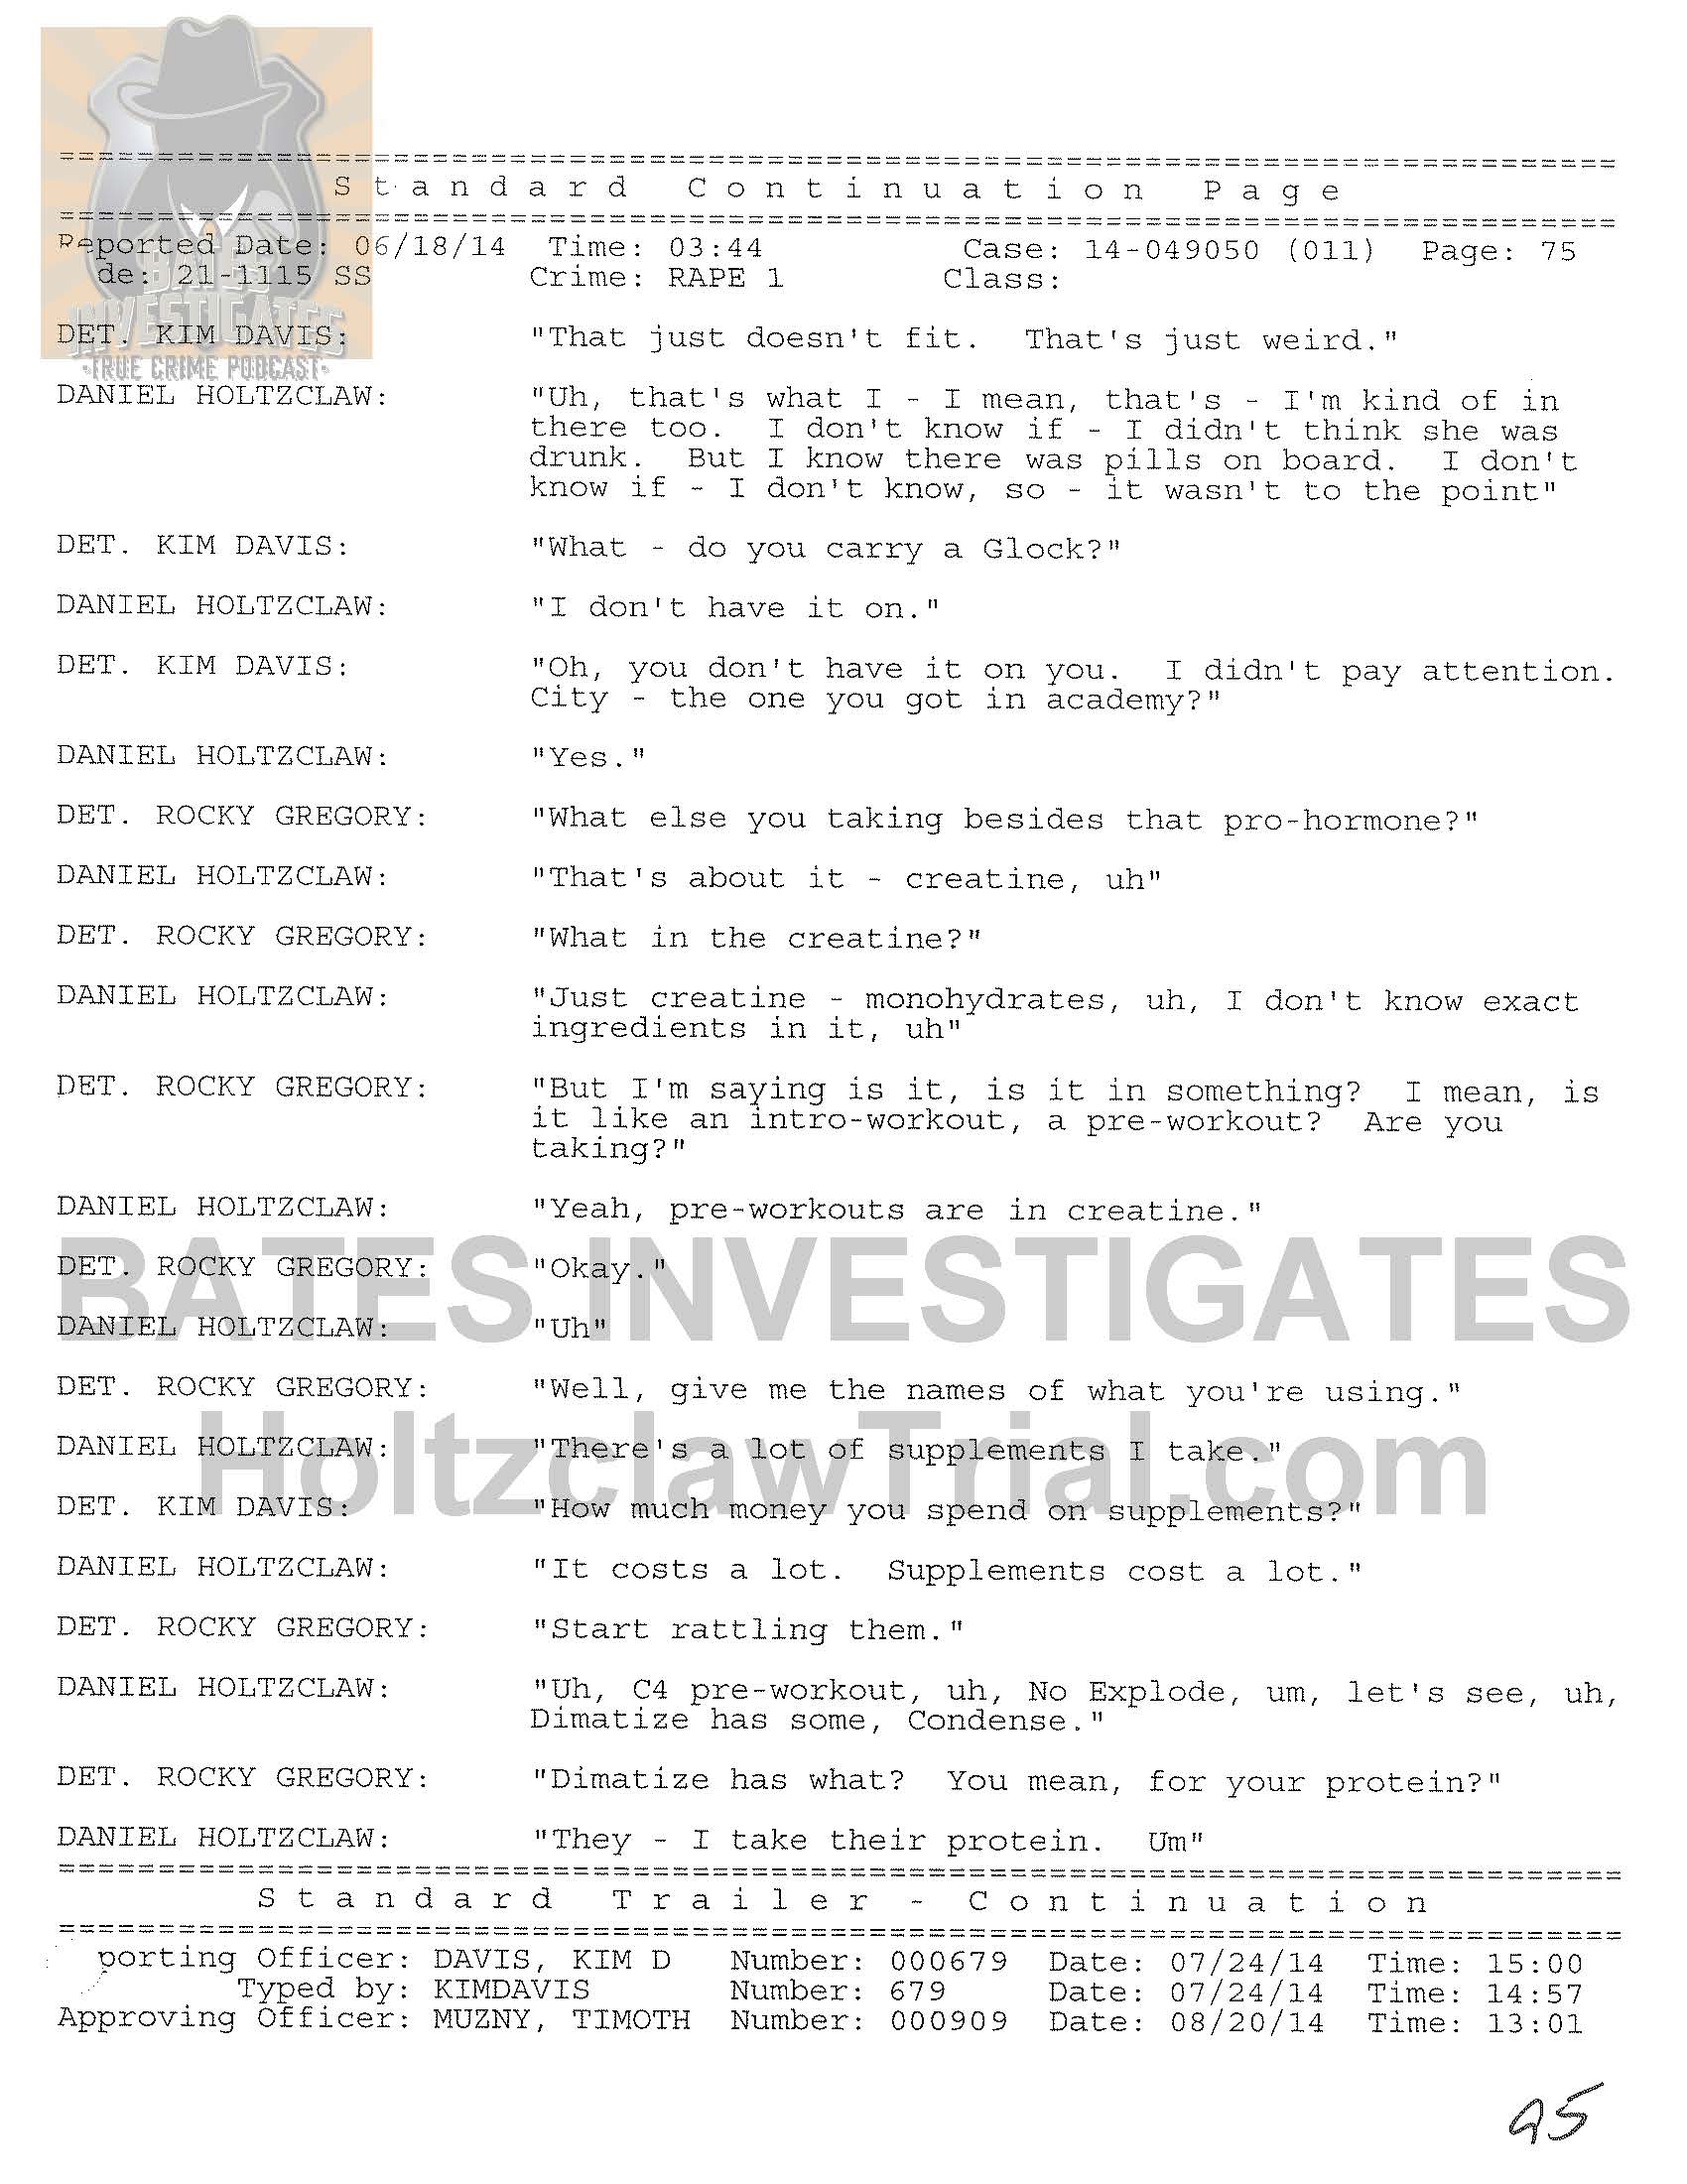 Holtzclaw Interrogation Transcript - Ep02 Redacted_Page_75.jpg